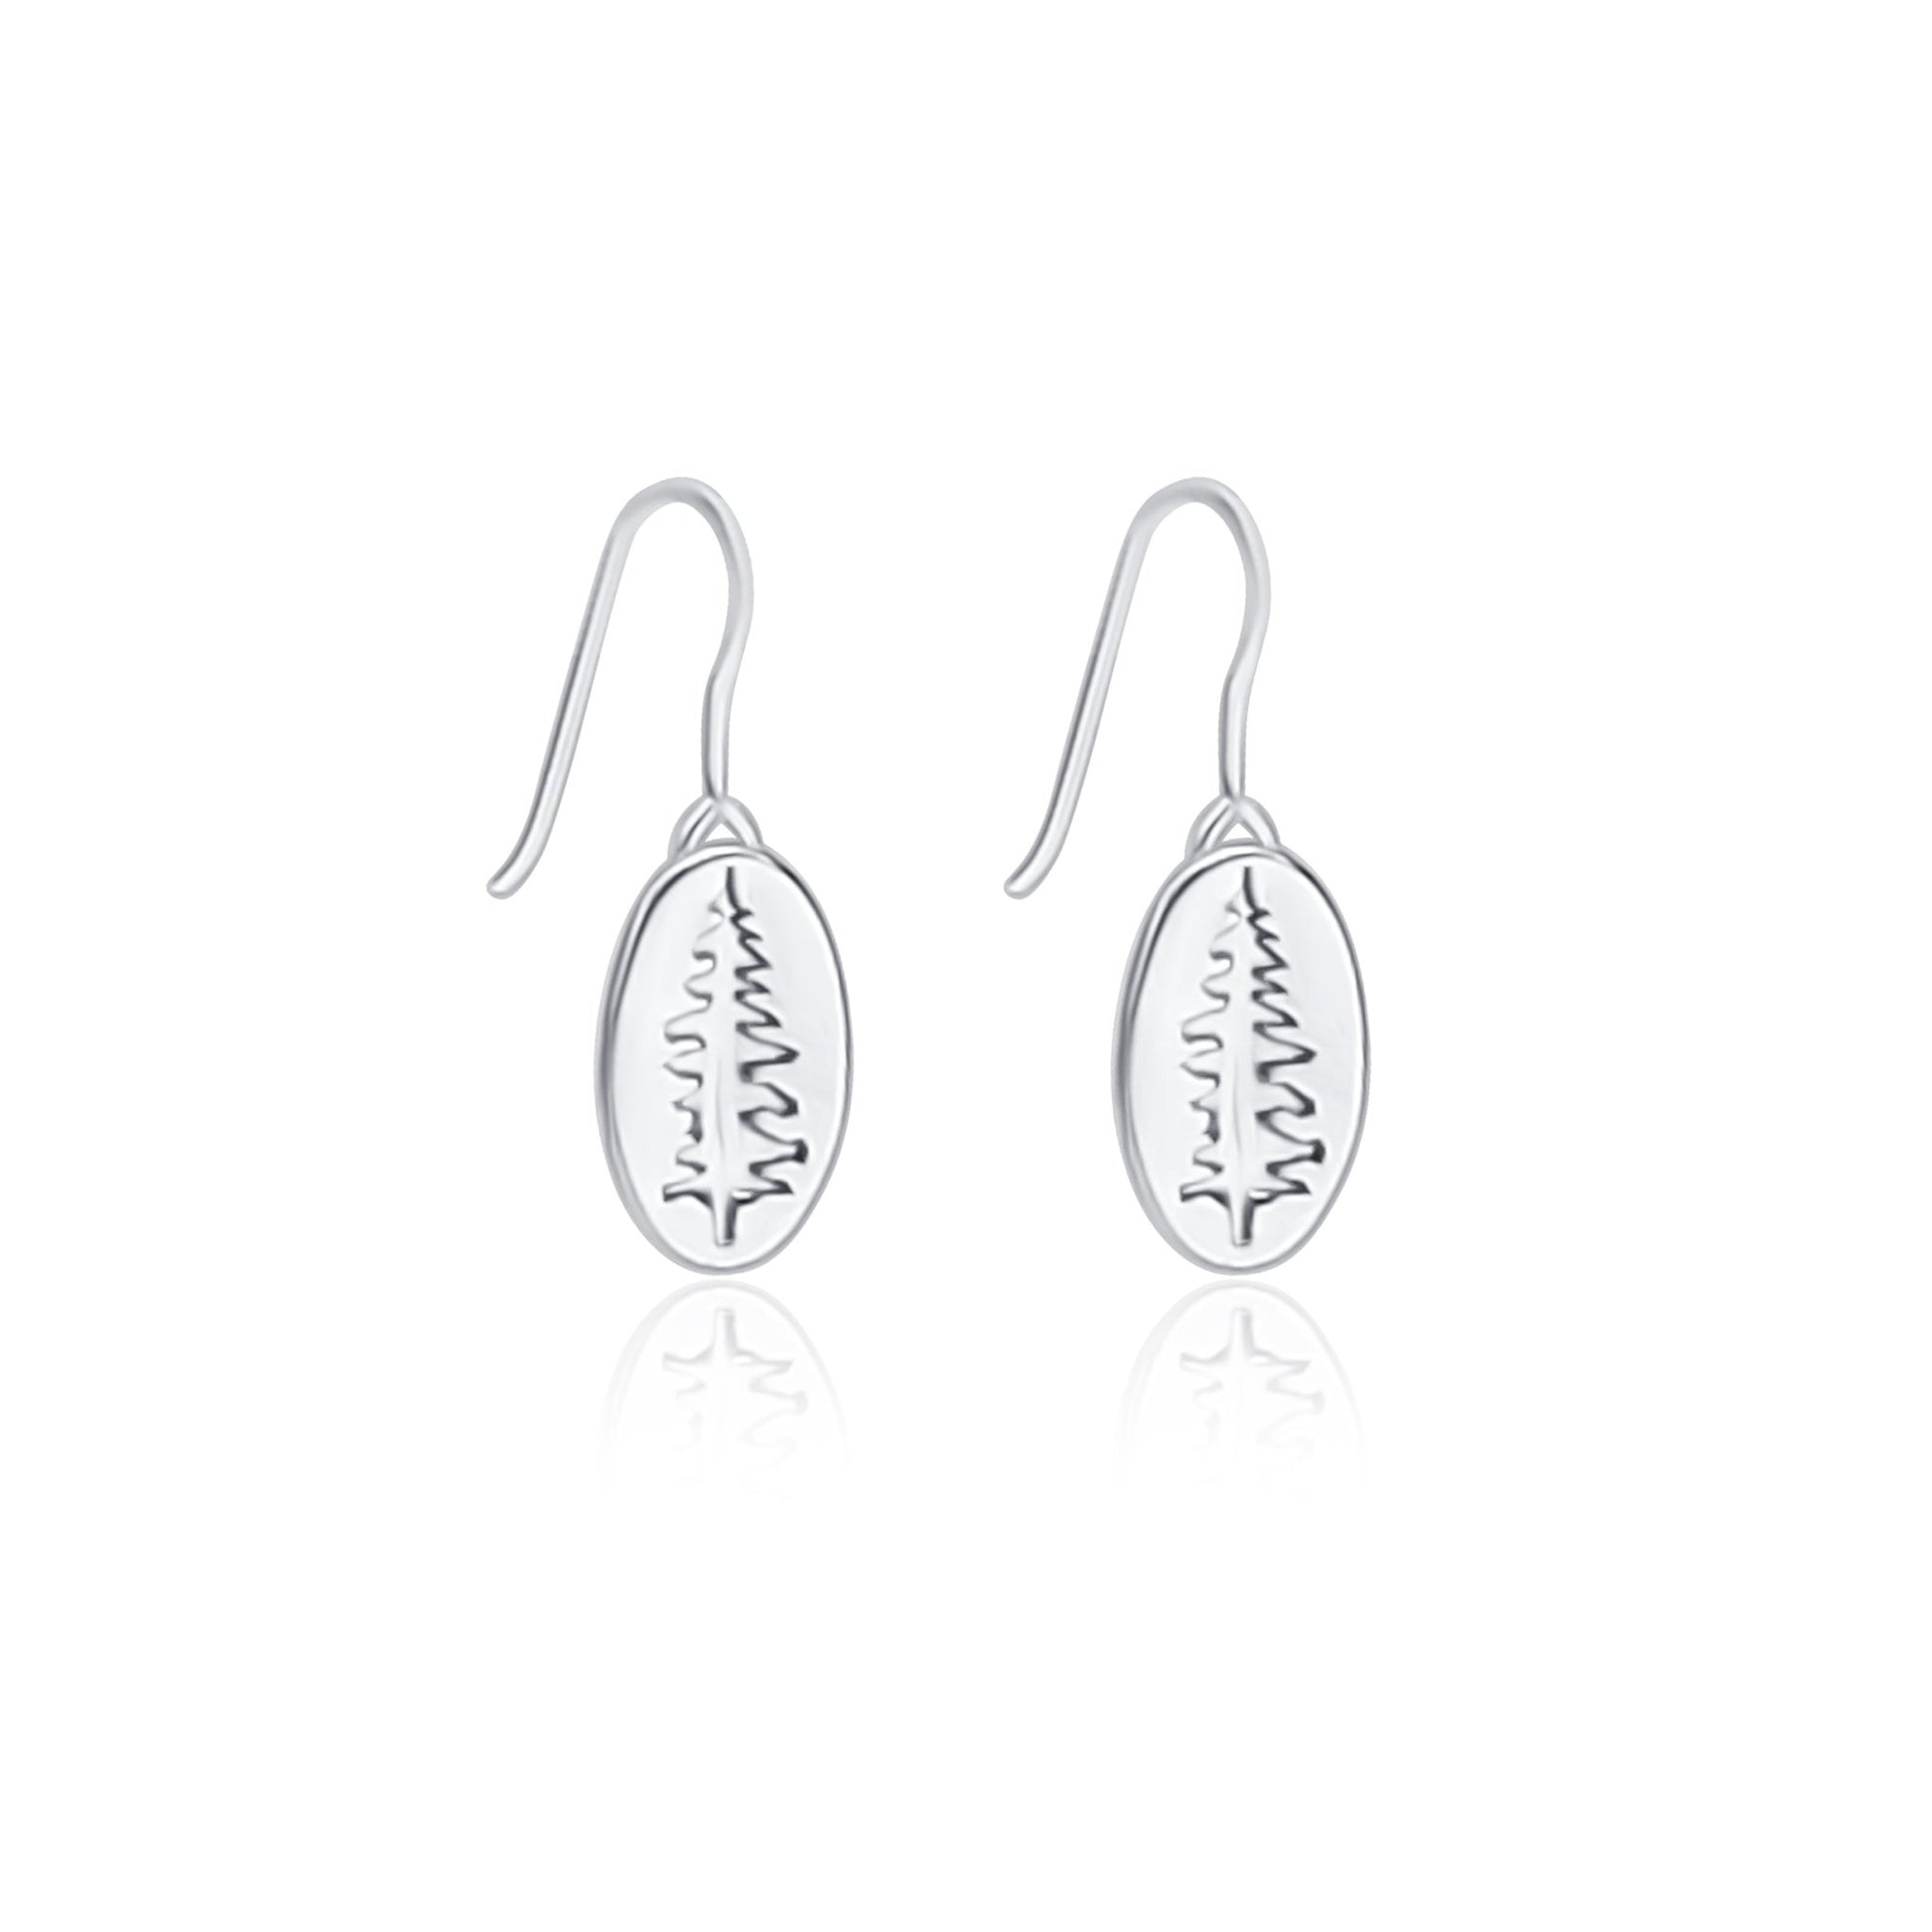 sterling silver oval dangle earrings with small sitka tree imprint